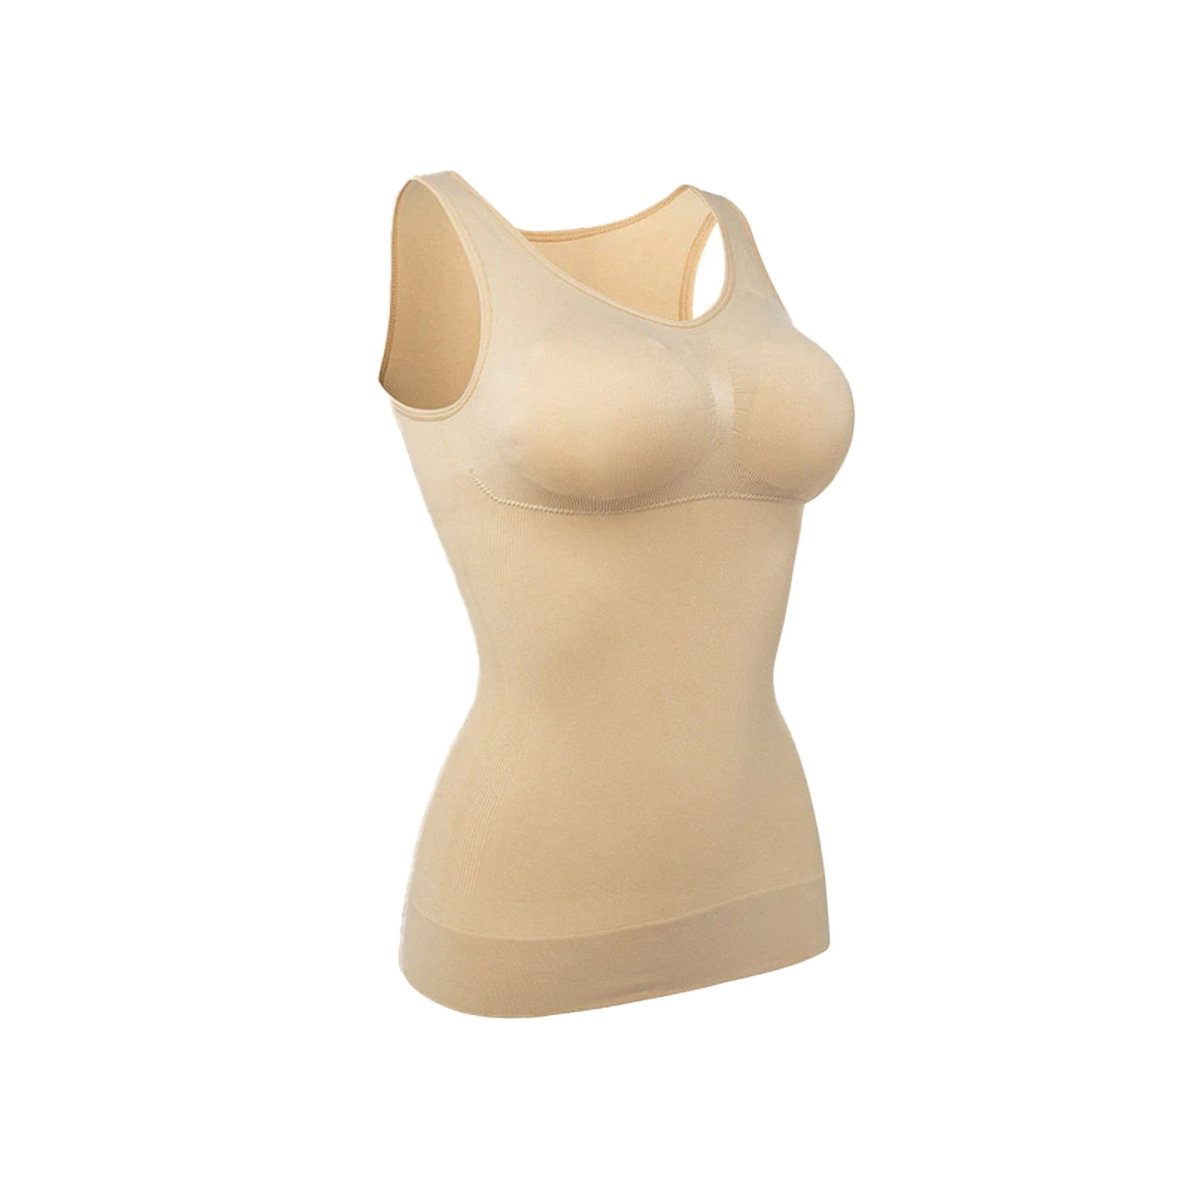 Cami Shaper by Genie 3 in 1 Garment with Removable Pads Look